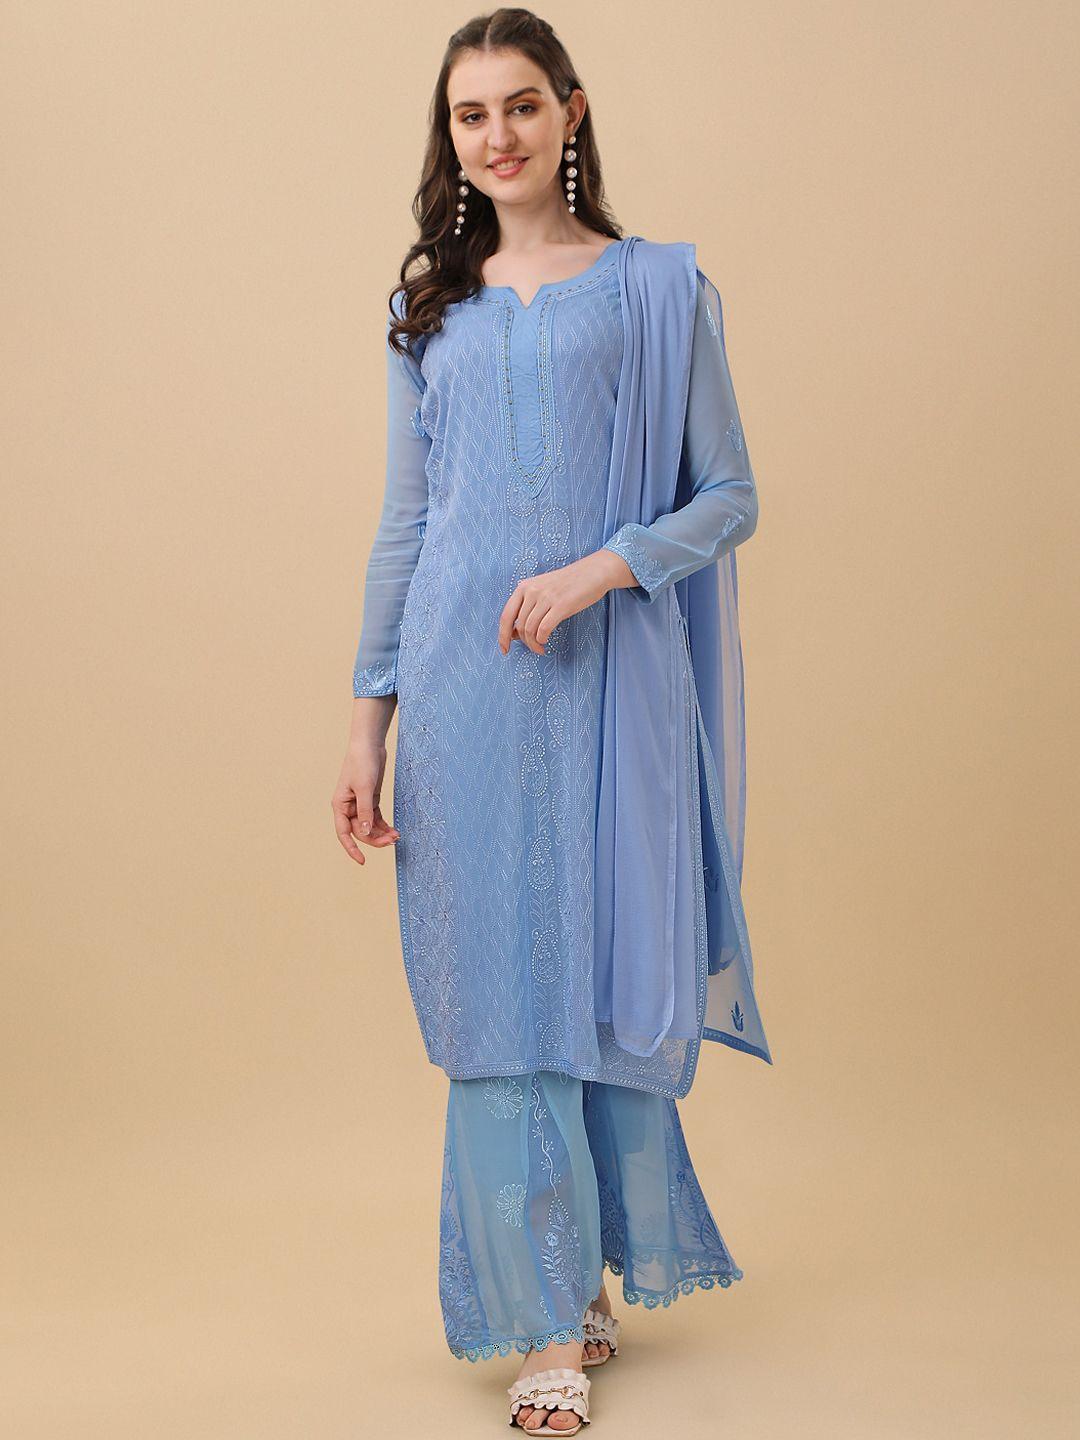 virah fashion women turquoise blue floral embroidered silk georgette kurta with sharara & with dupatta